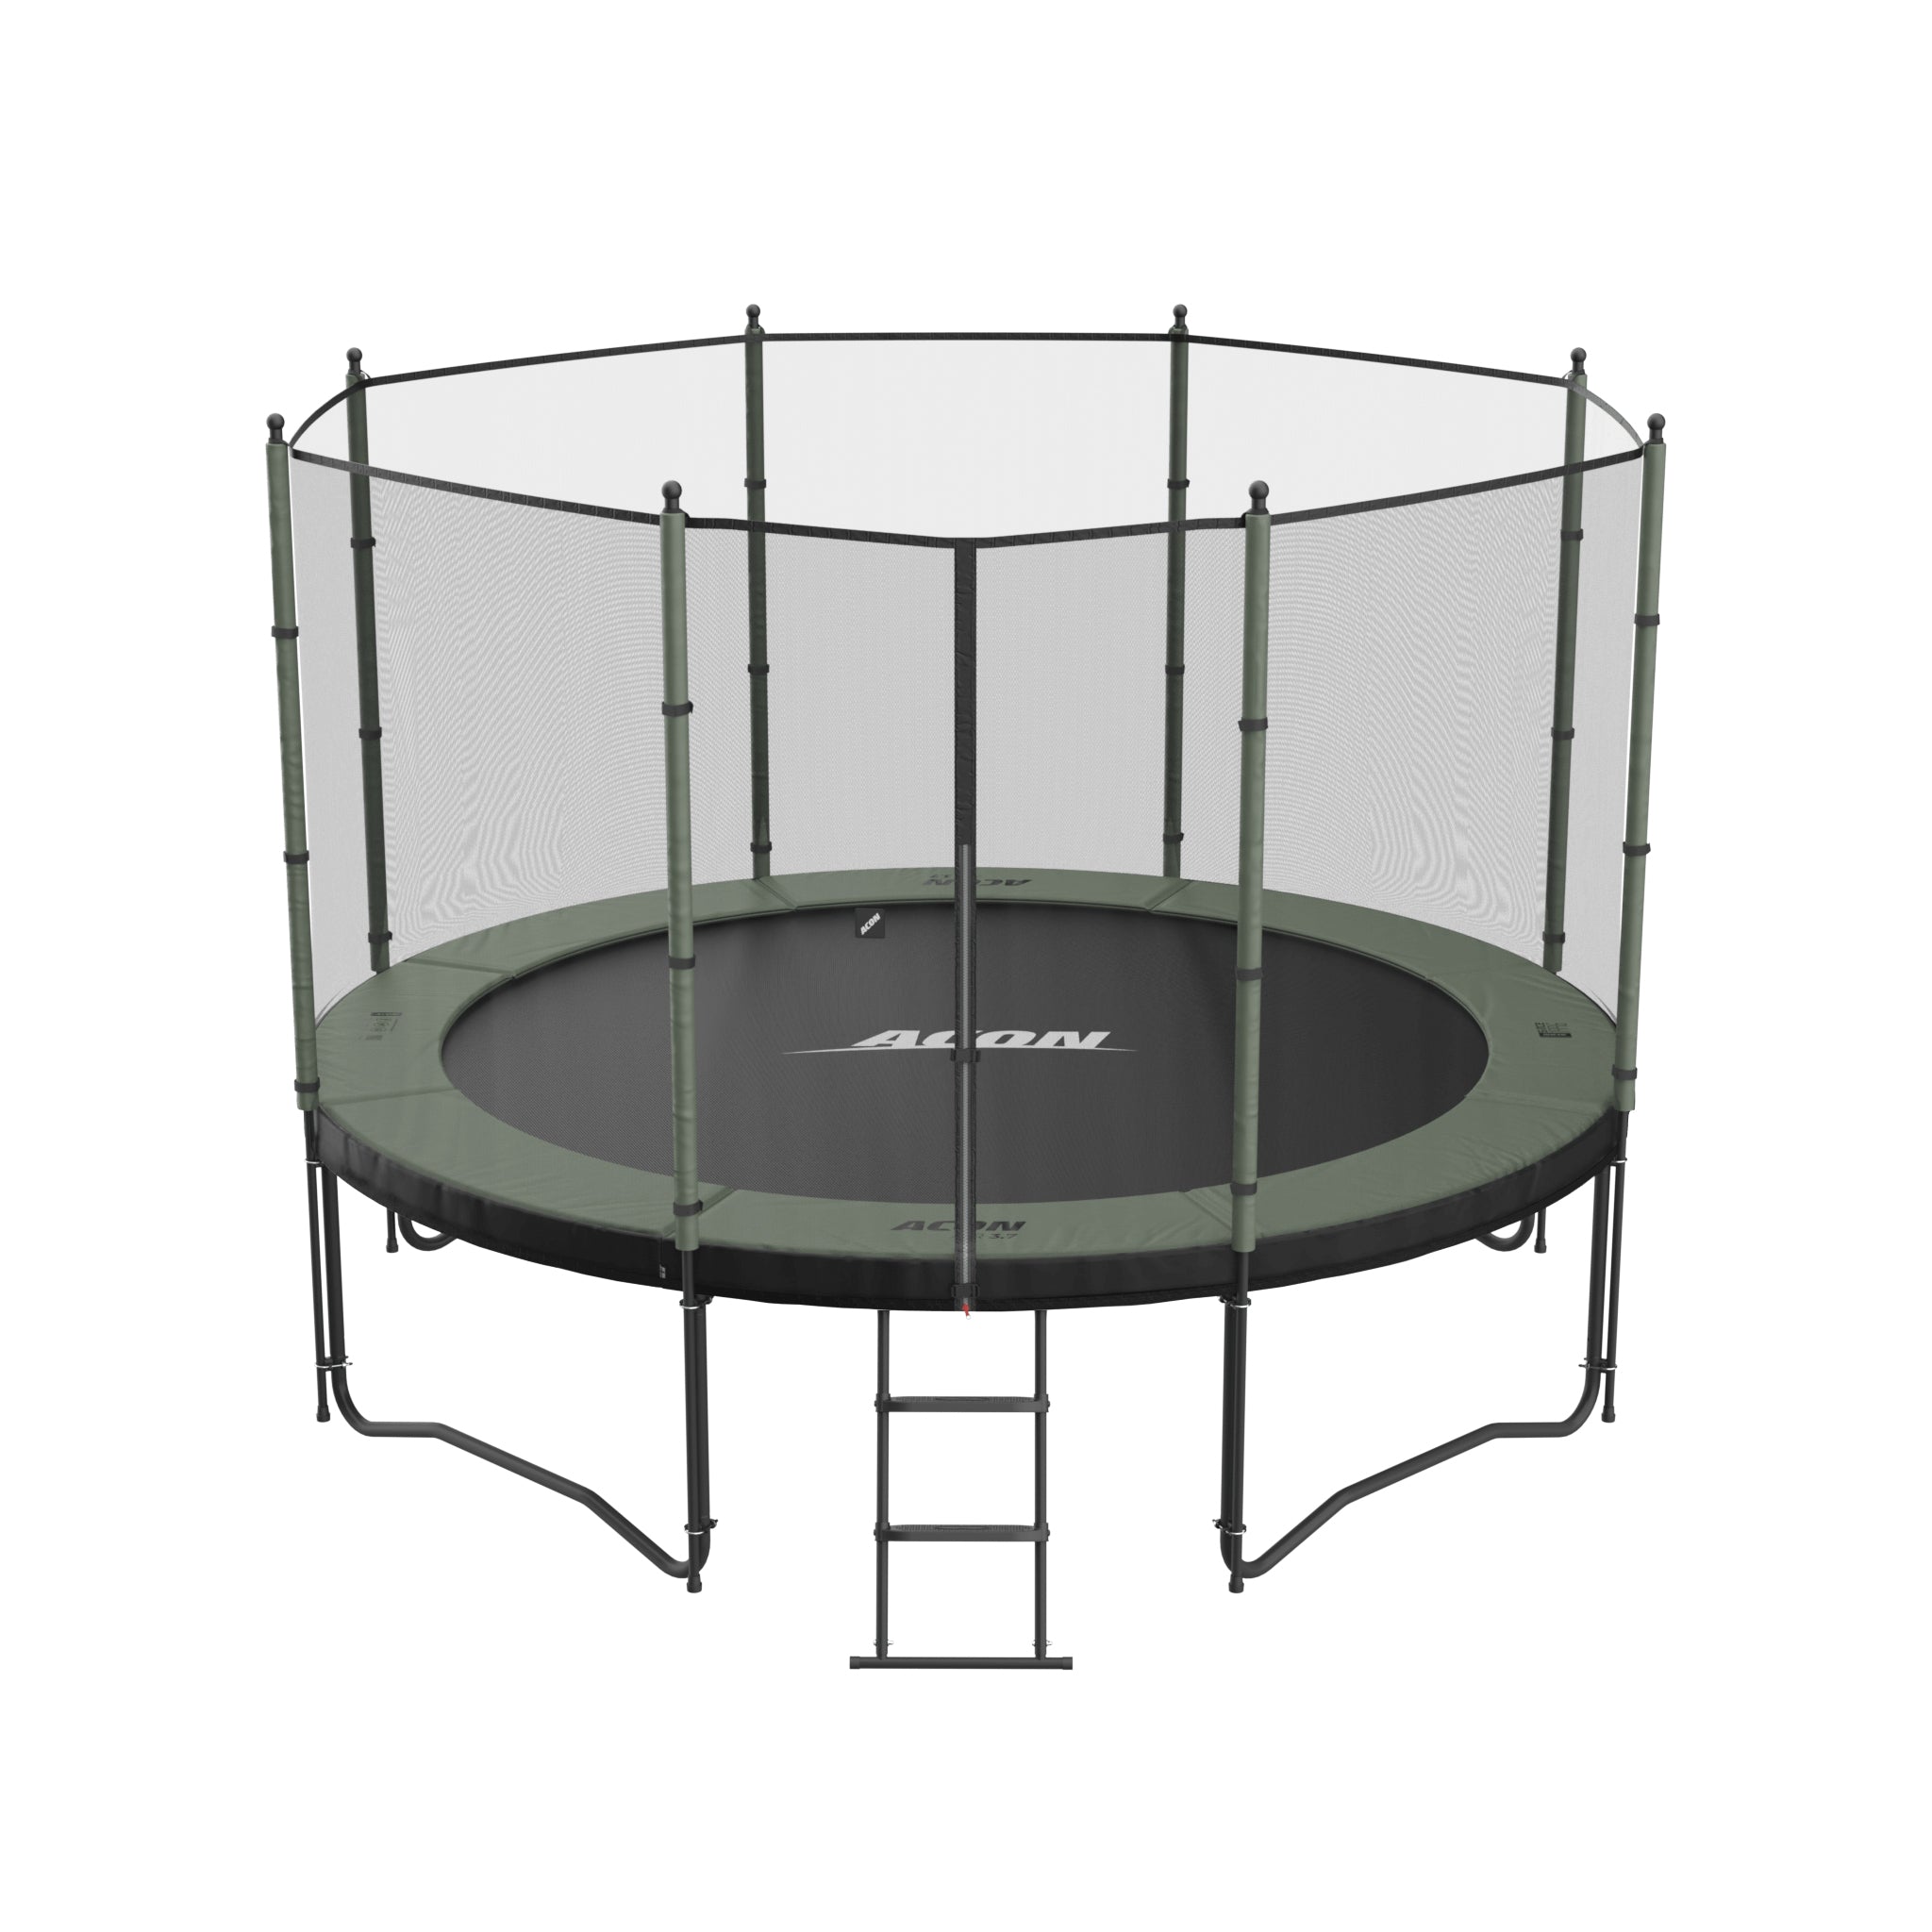 ACON Air 12ft Trampoline with Standard Enclosure and ladder.